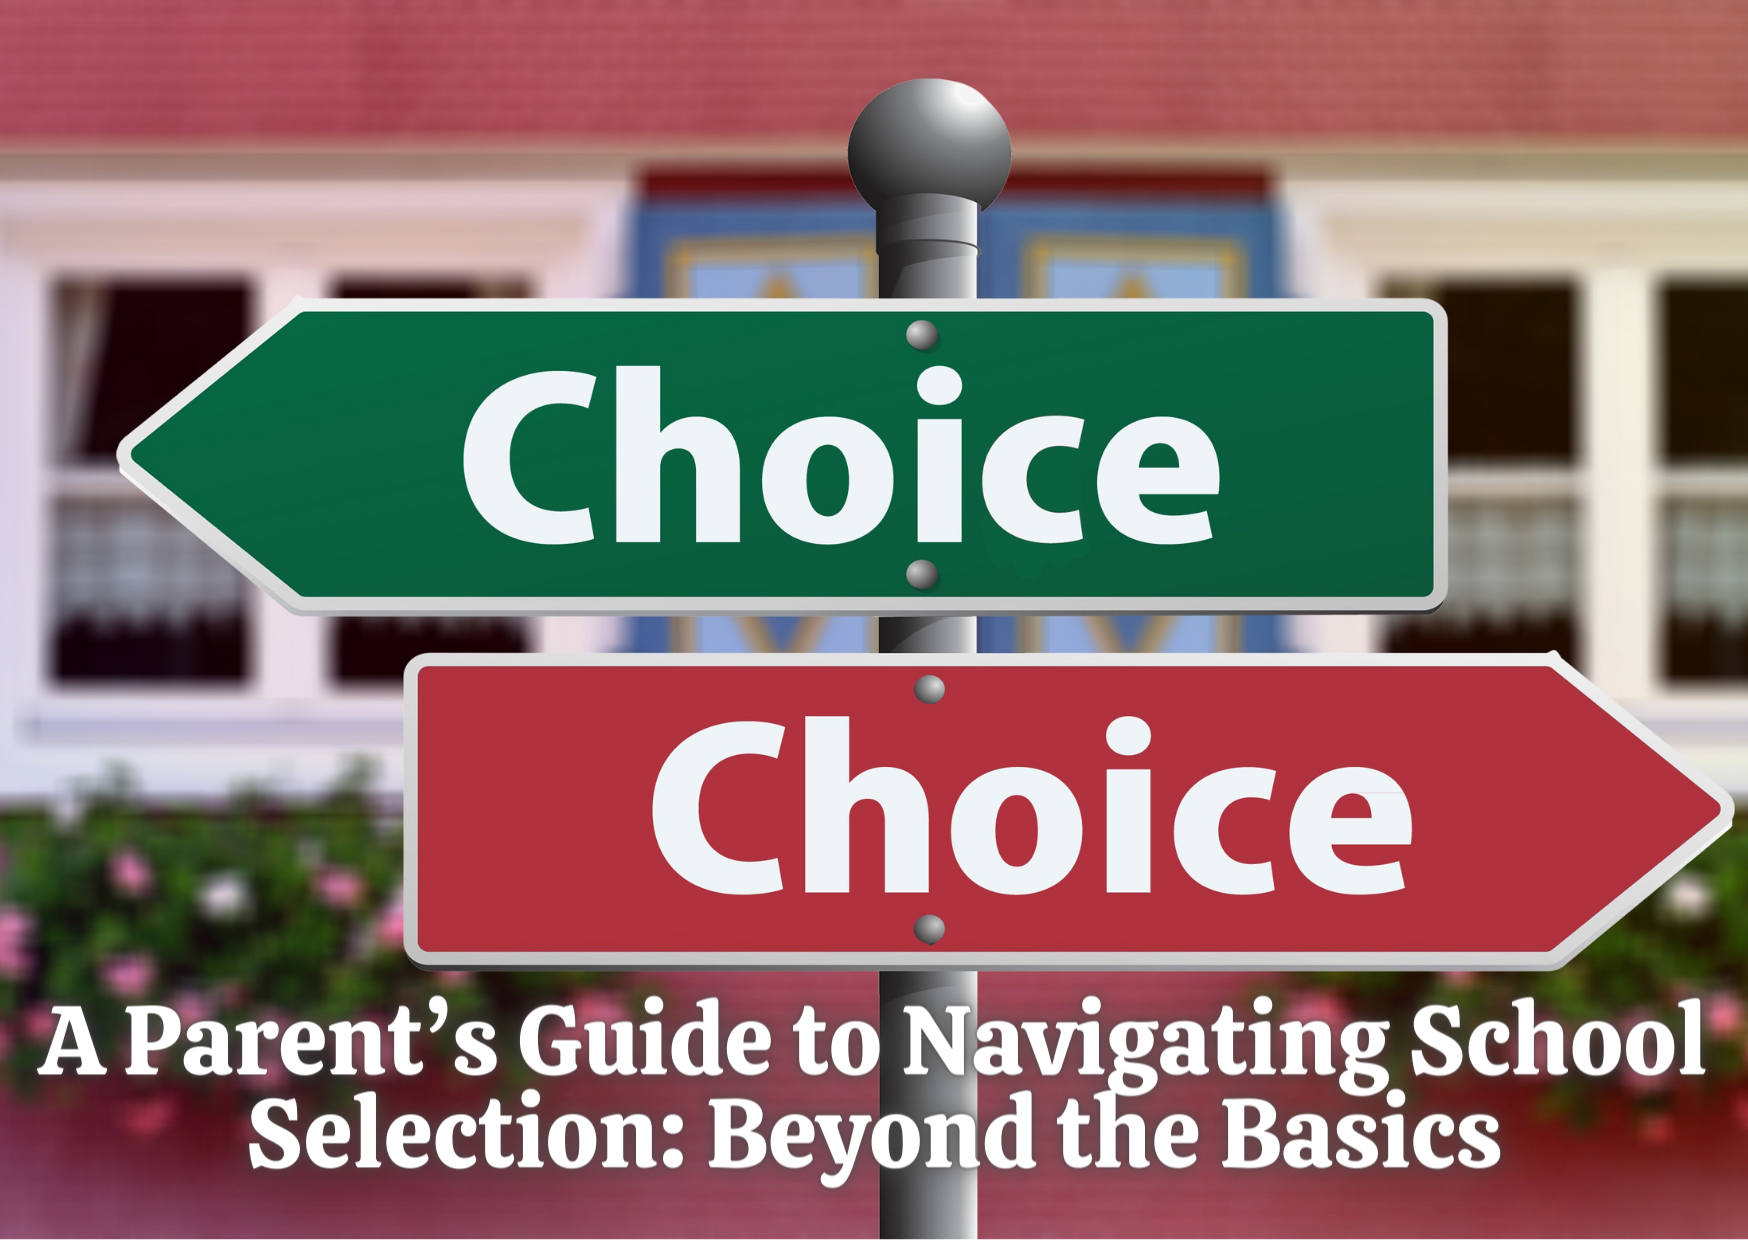 A Parent’s Guide to Navigating School Selection: Beyond the Basics